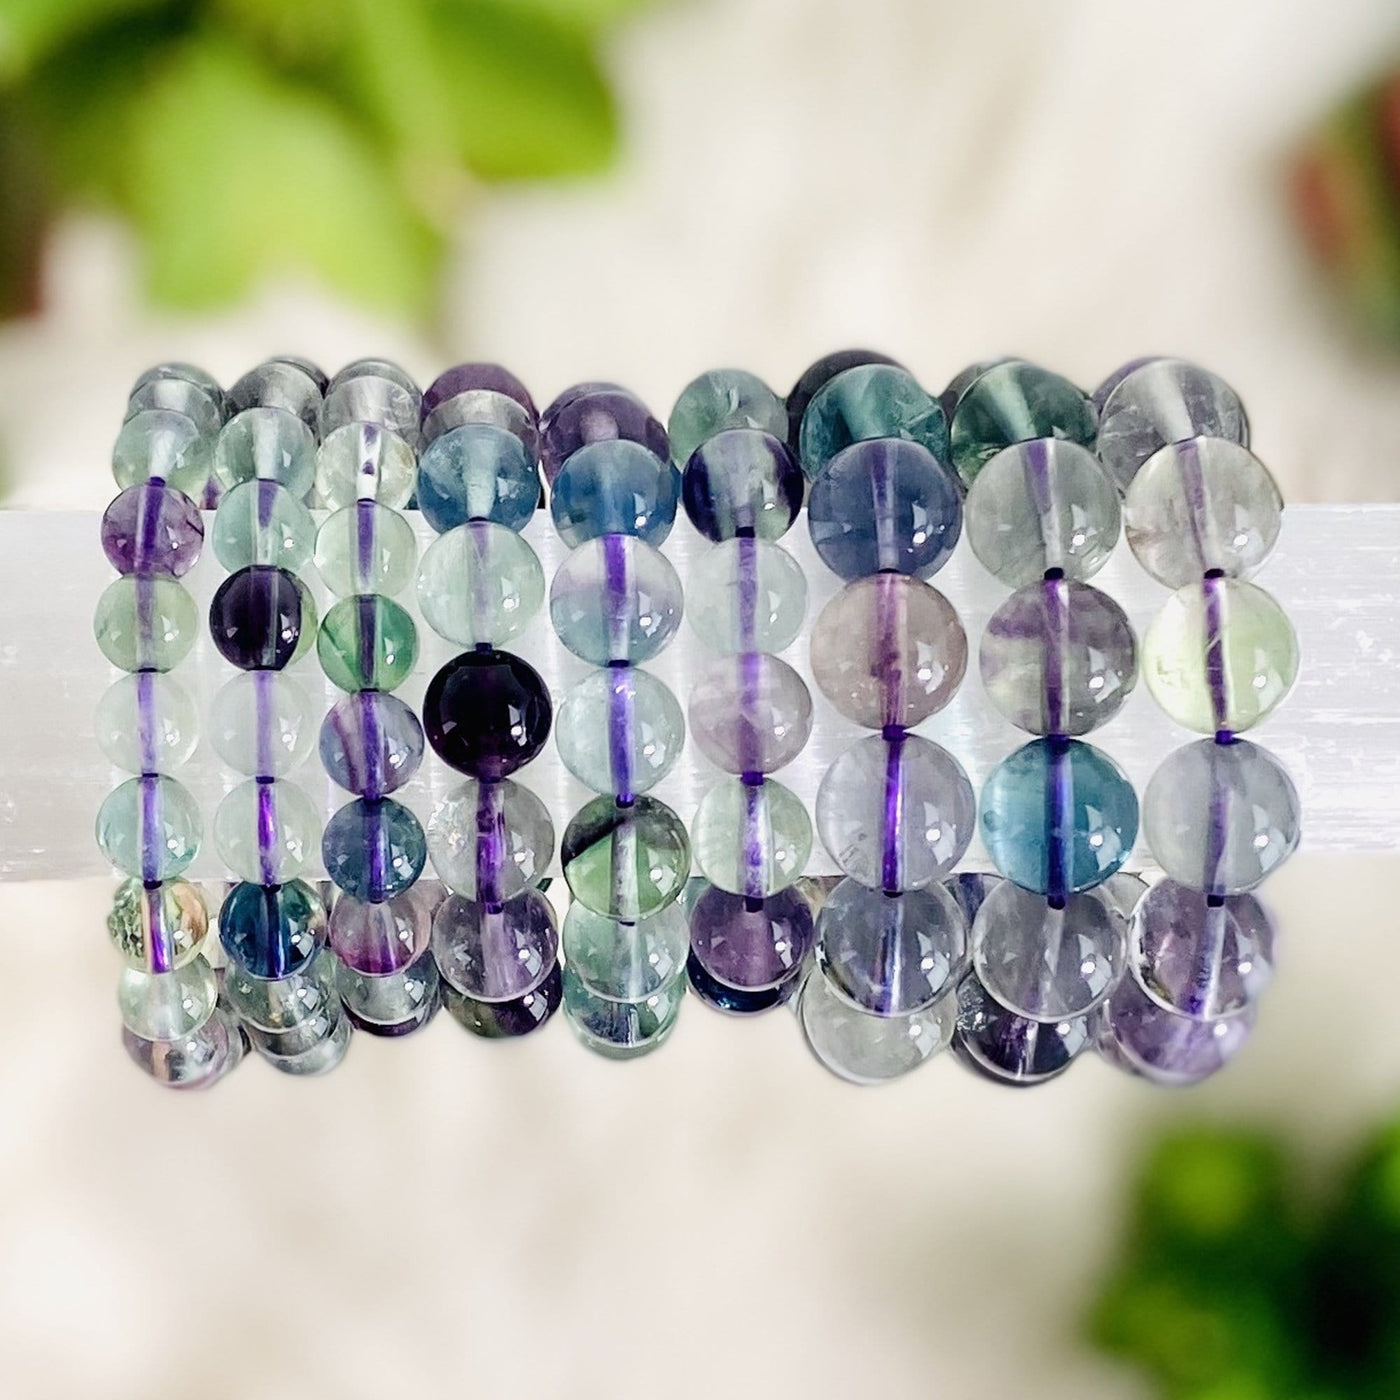 9 Rainbow Fluorite Round Bead Bracelets displayed on bracelet stand with plants blurred on white background